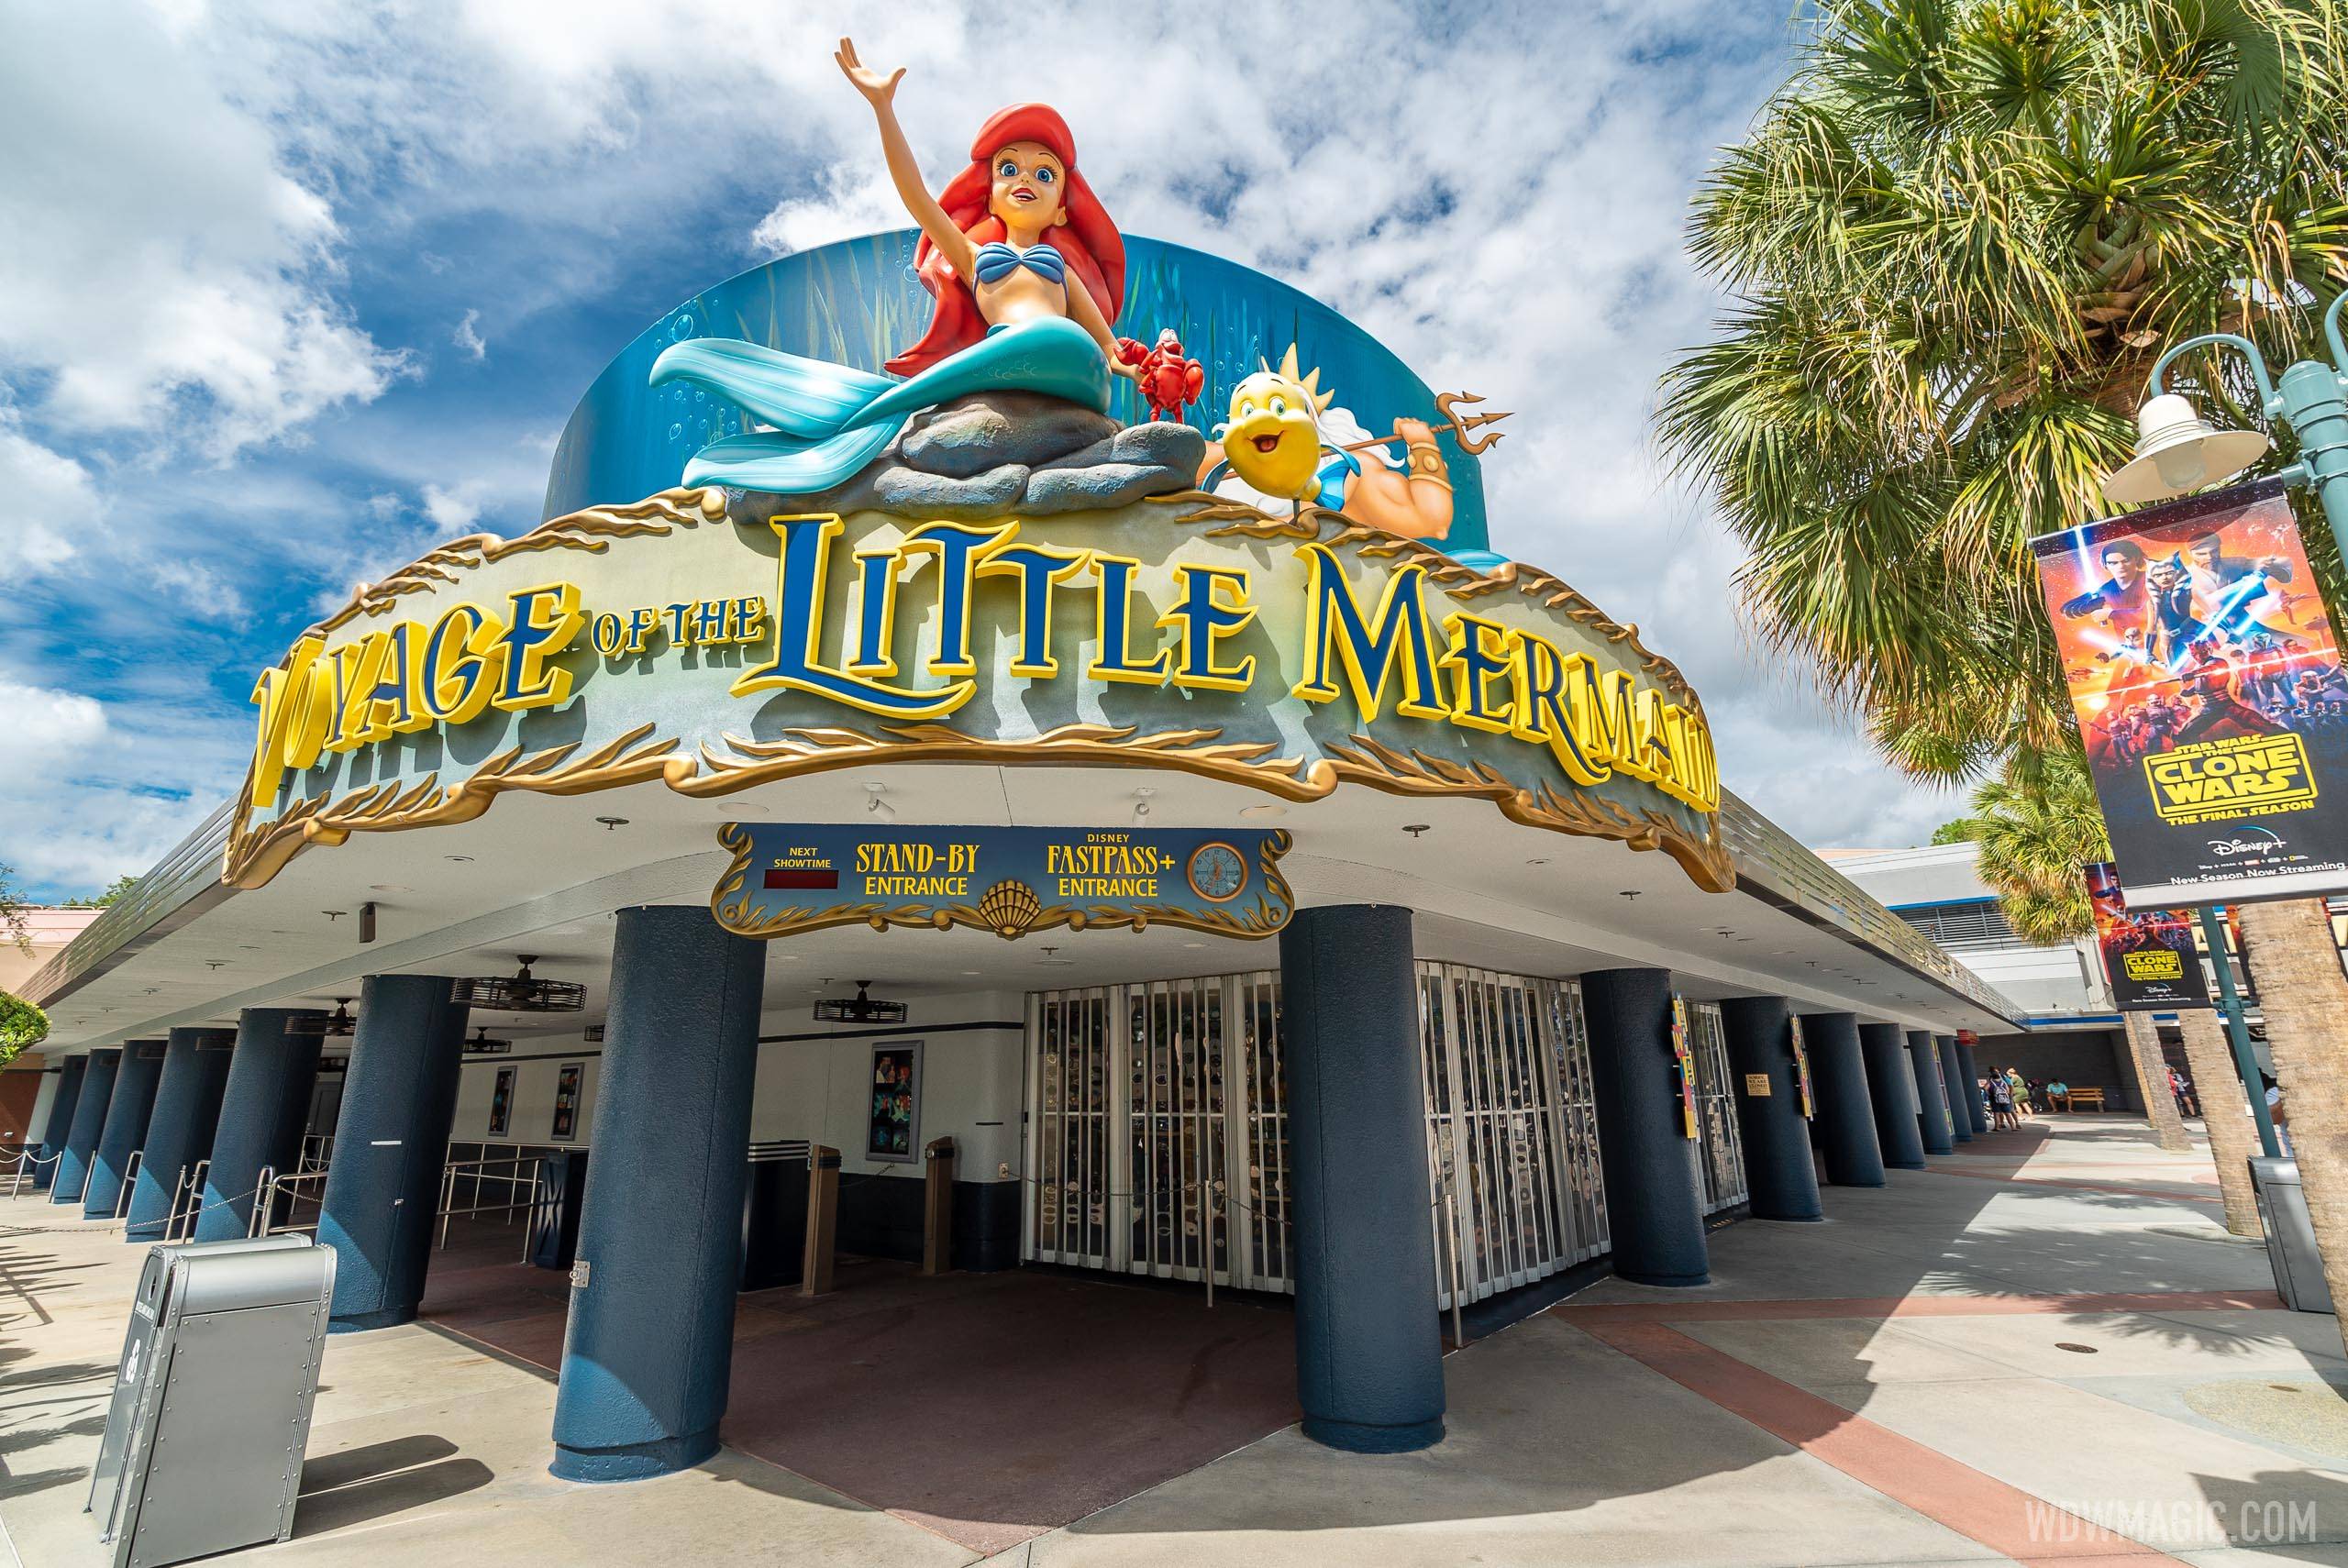 Disney plans to reboot Voyage of the Little Mermaid stage show at Disney's Hollywood Studios